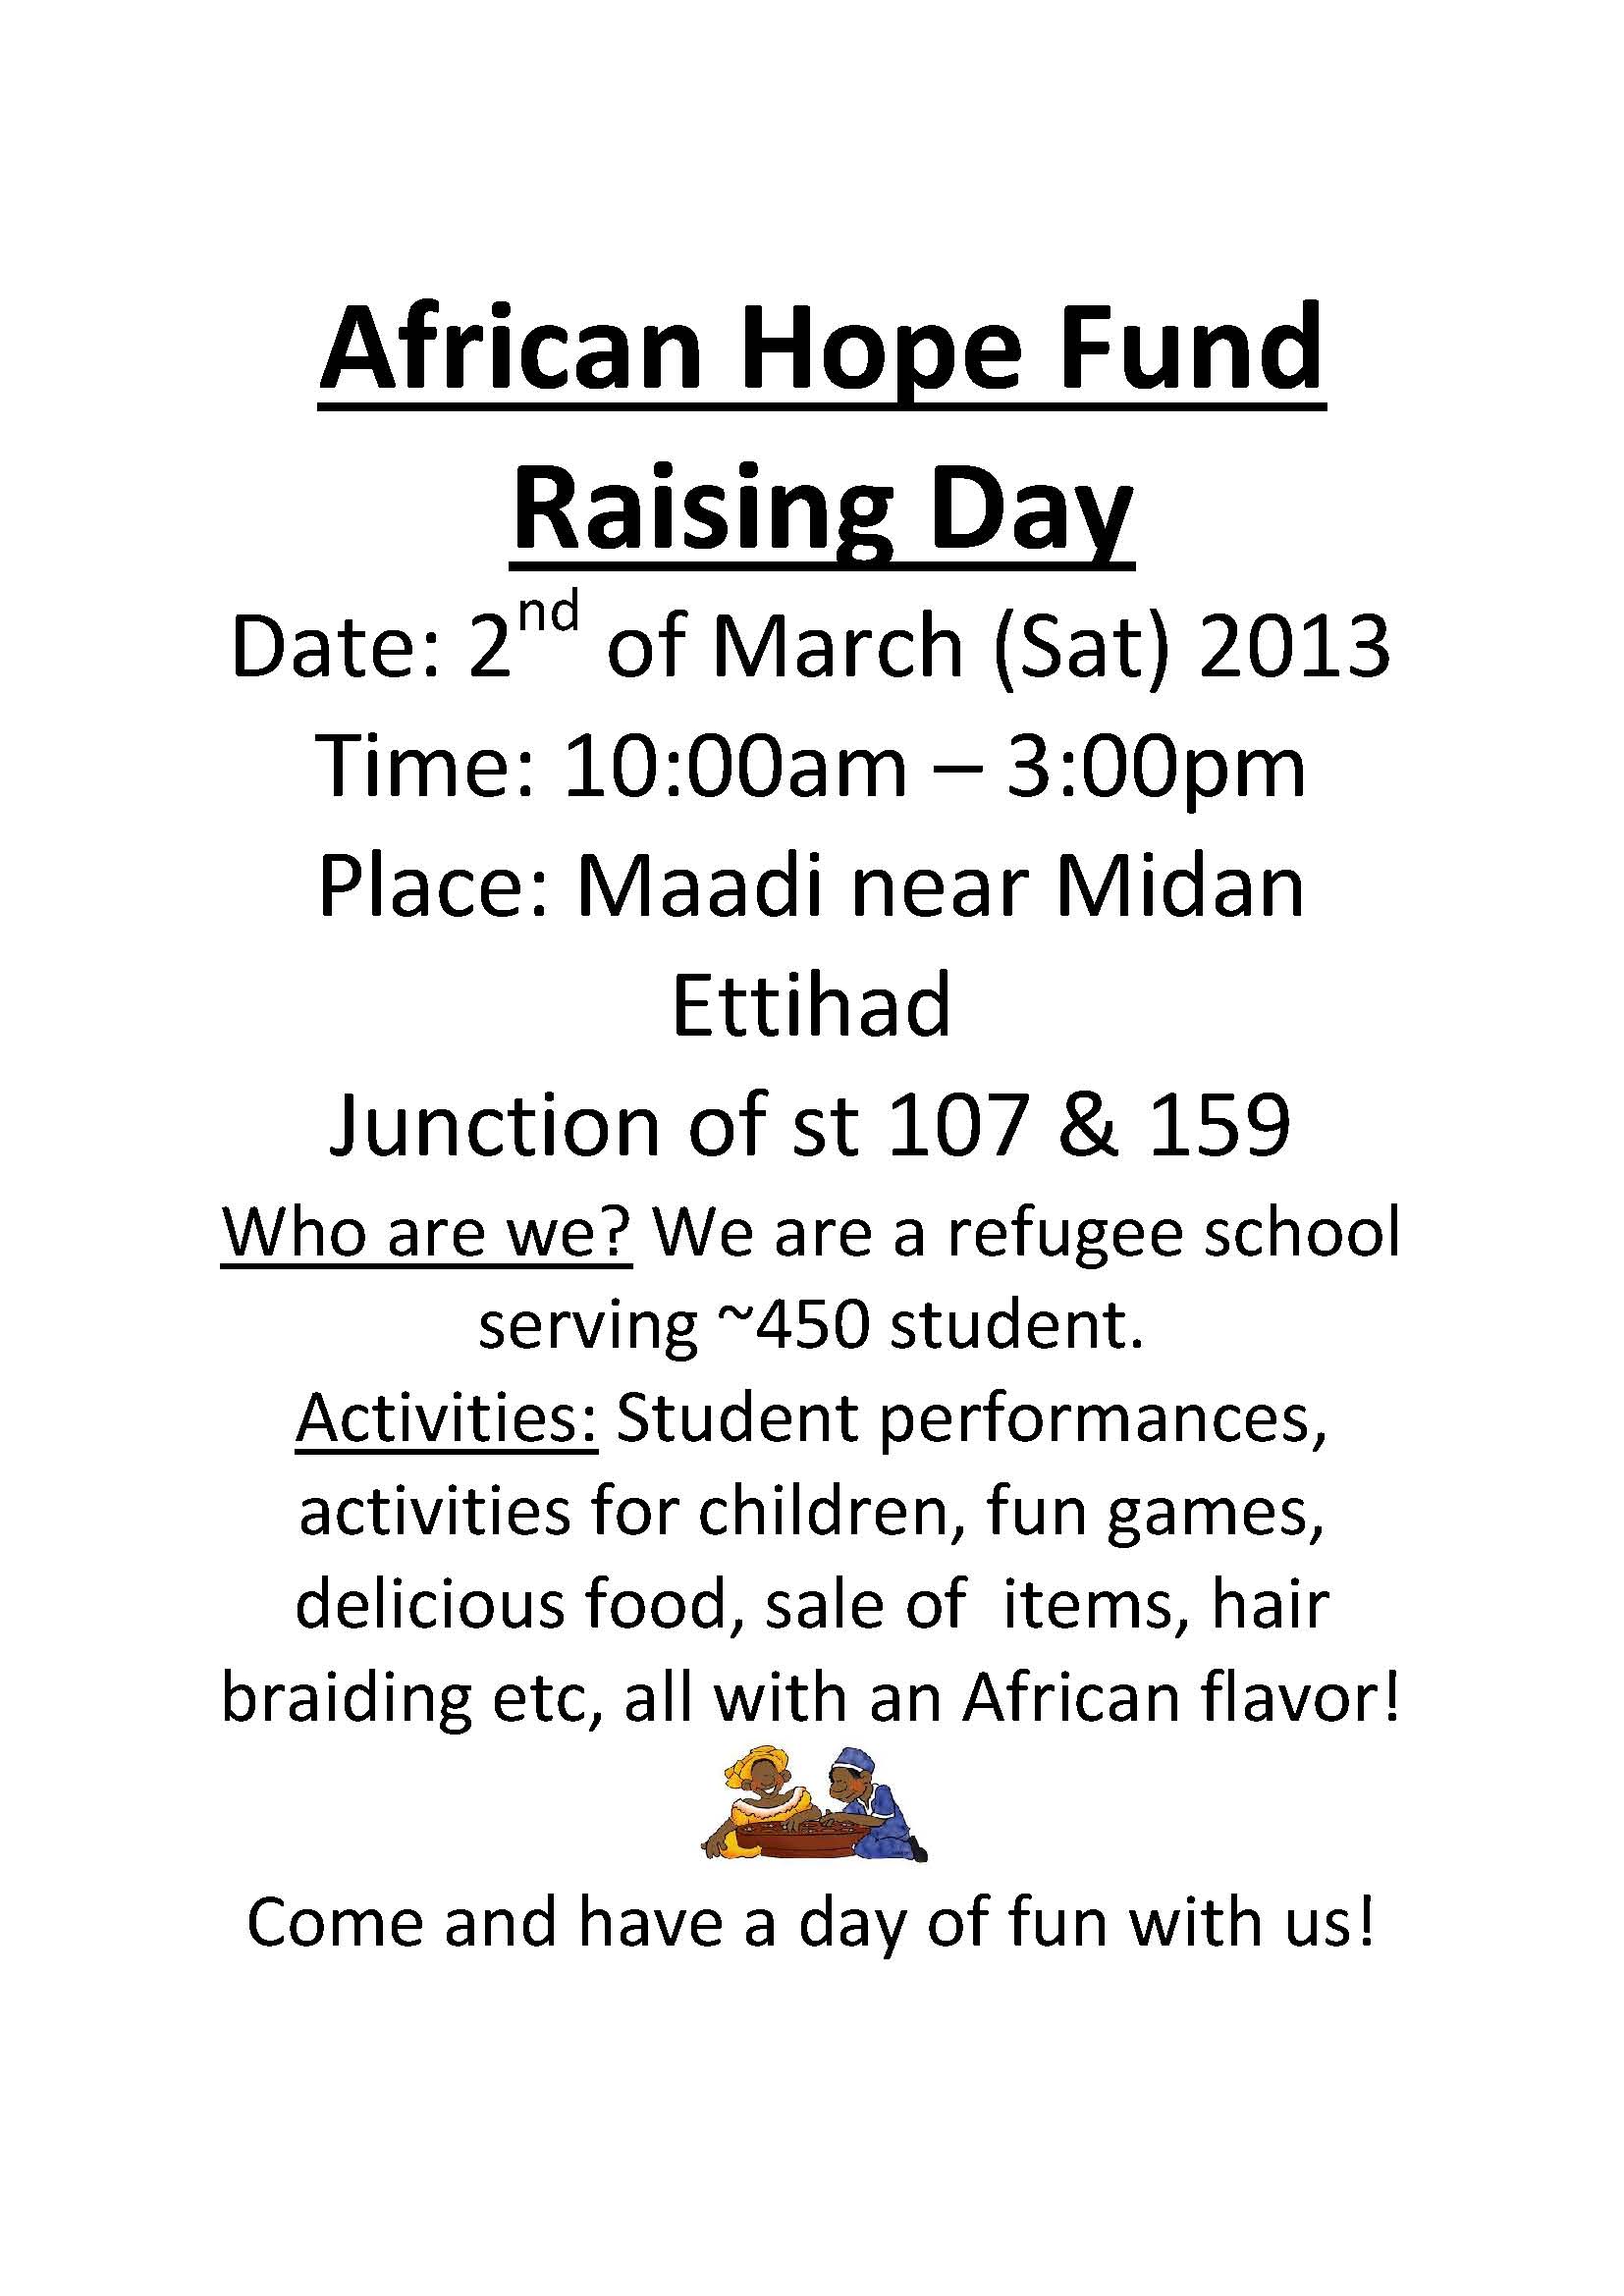 African Hope Fund Raising Day_2nd March A4 Advert